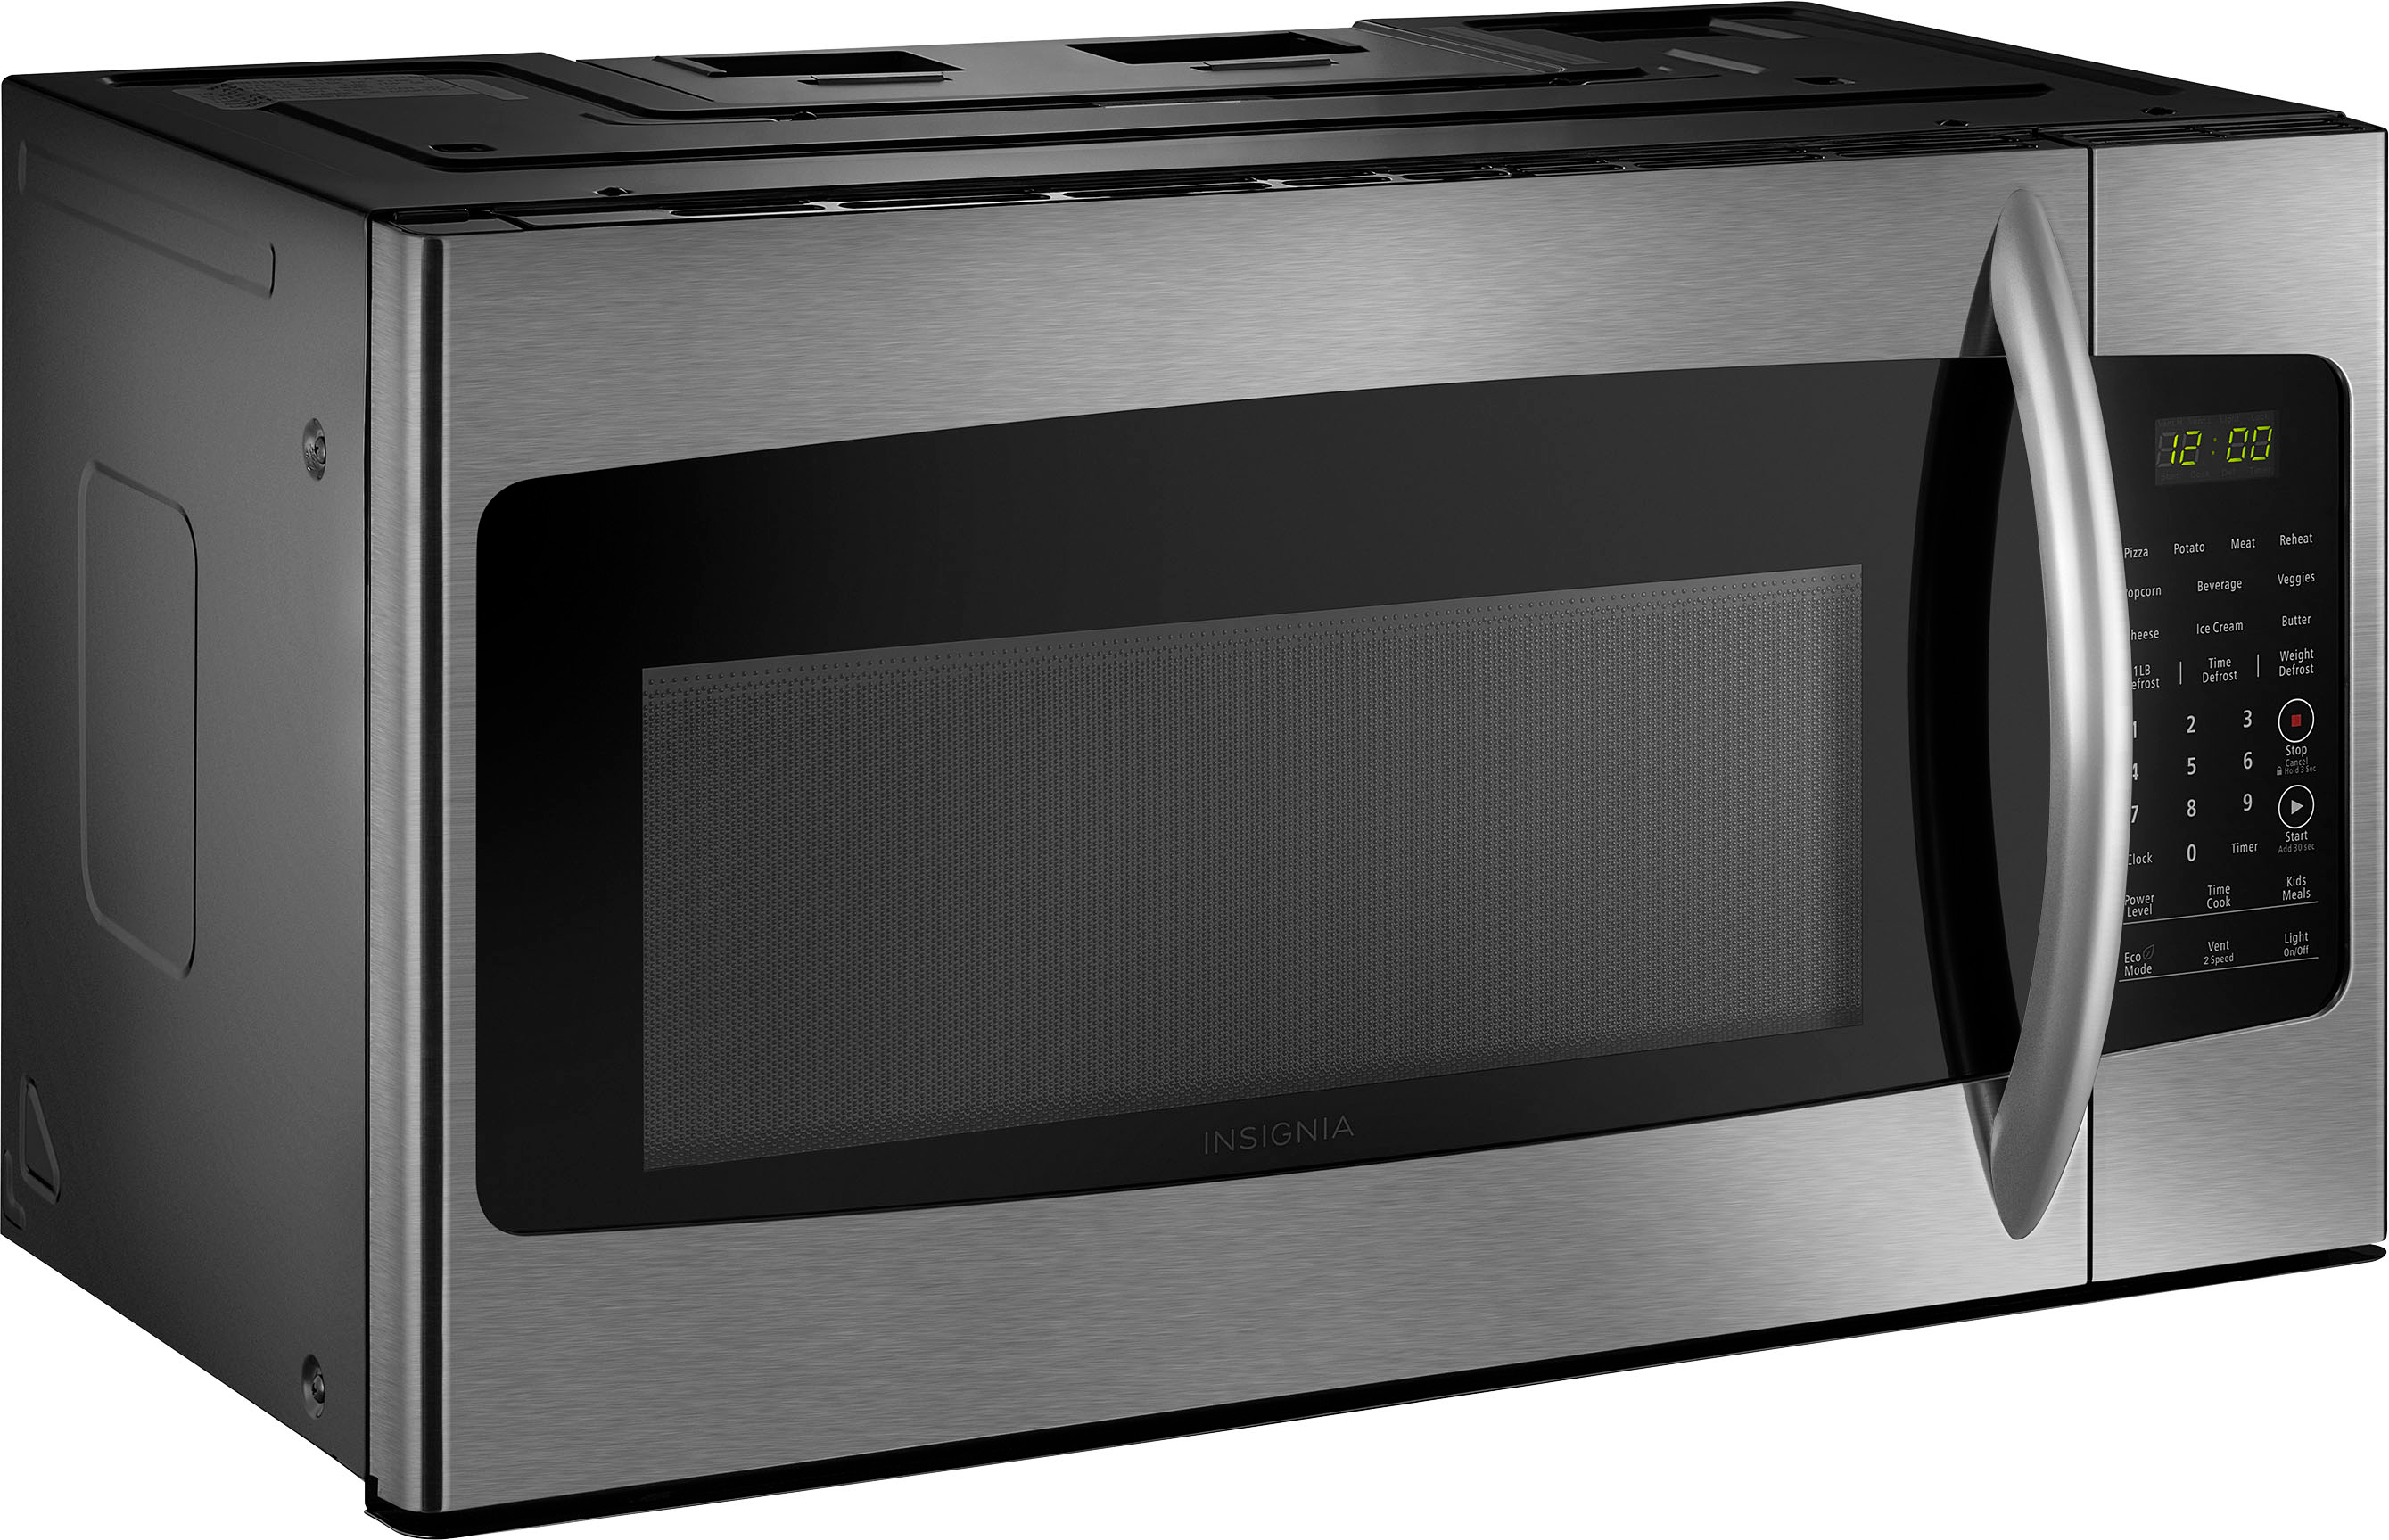  Insignia - 0.9 Cu. Ft. Compact Microwave - Stainless steel :  Home & Kitchen